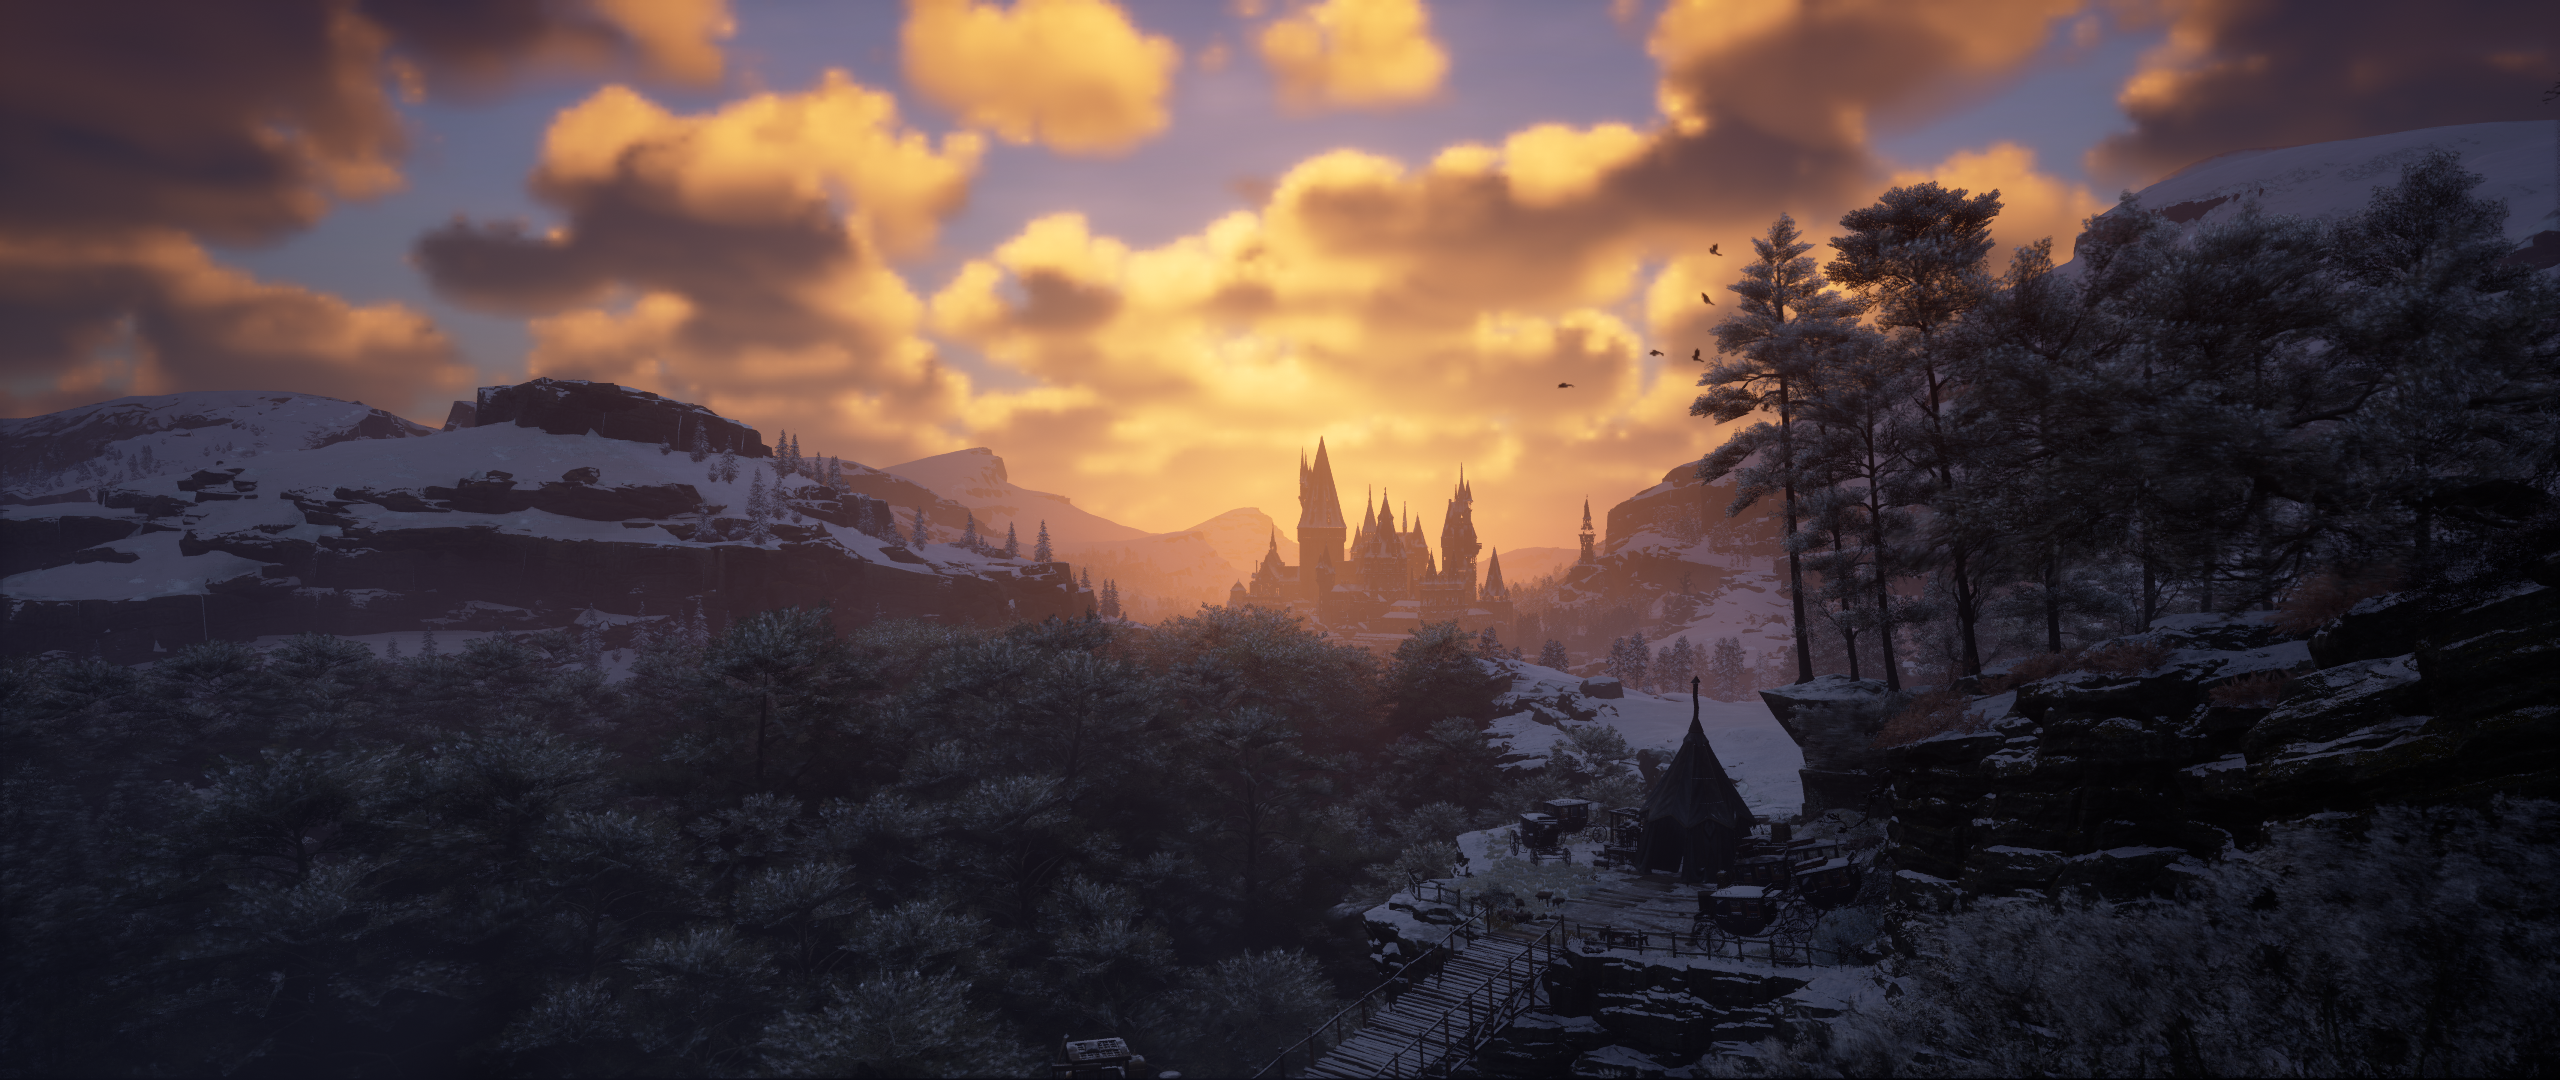 General 2560x1080 Hogwarts Hogwarts Legacy Harry Potter PC gaming landscape screen shot Avalanche Software clouds video games sky sunset glow sunset trees snow CGI